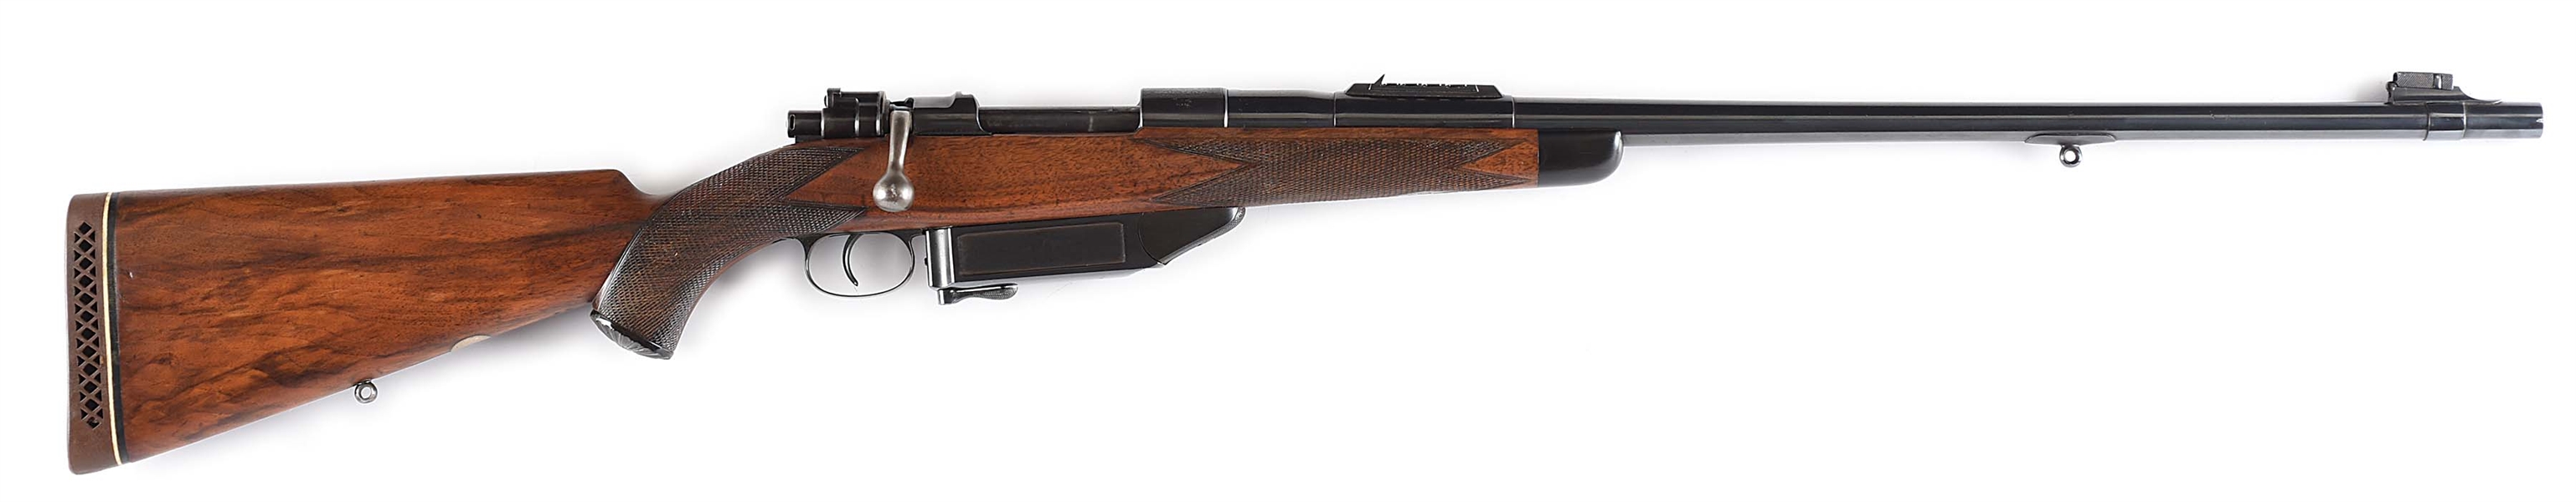 (C) SCARCE AND DESIRABLE WESTLEY RICHARDS .425 MAGNUM EXPRESS BOLT ACTION RIFLE